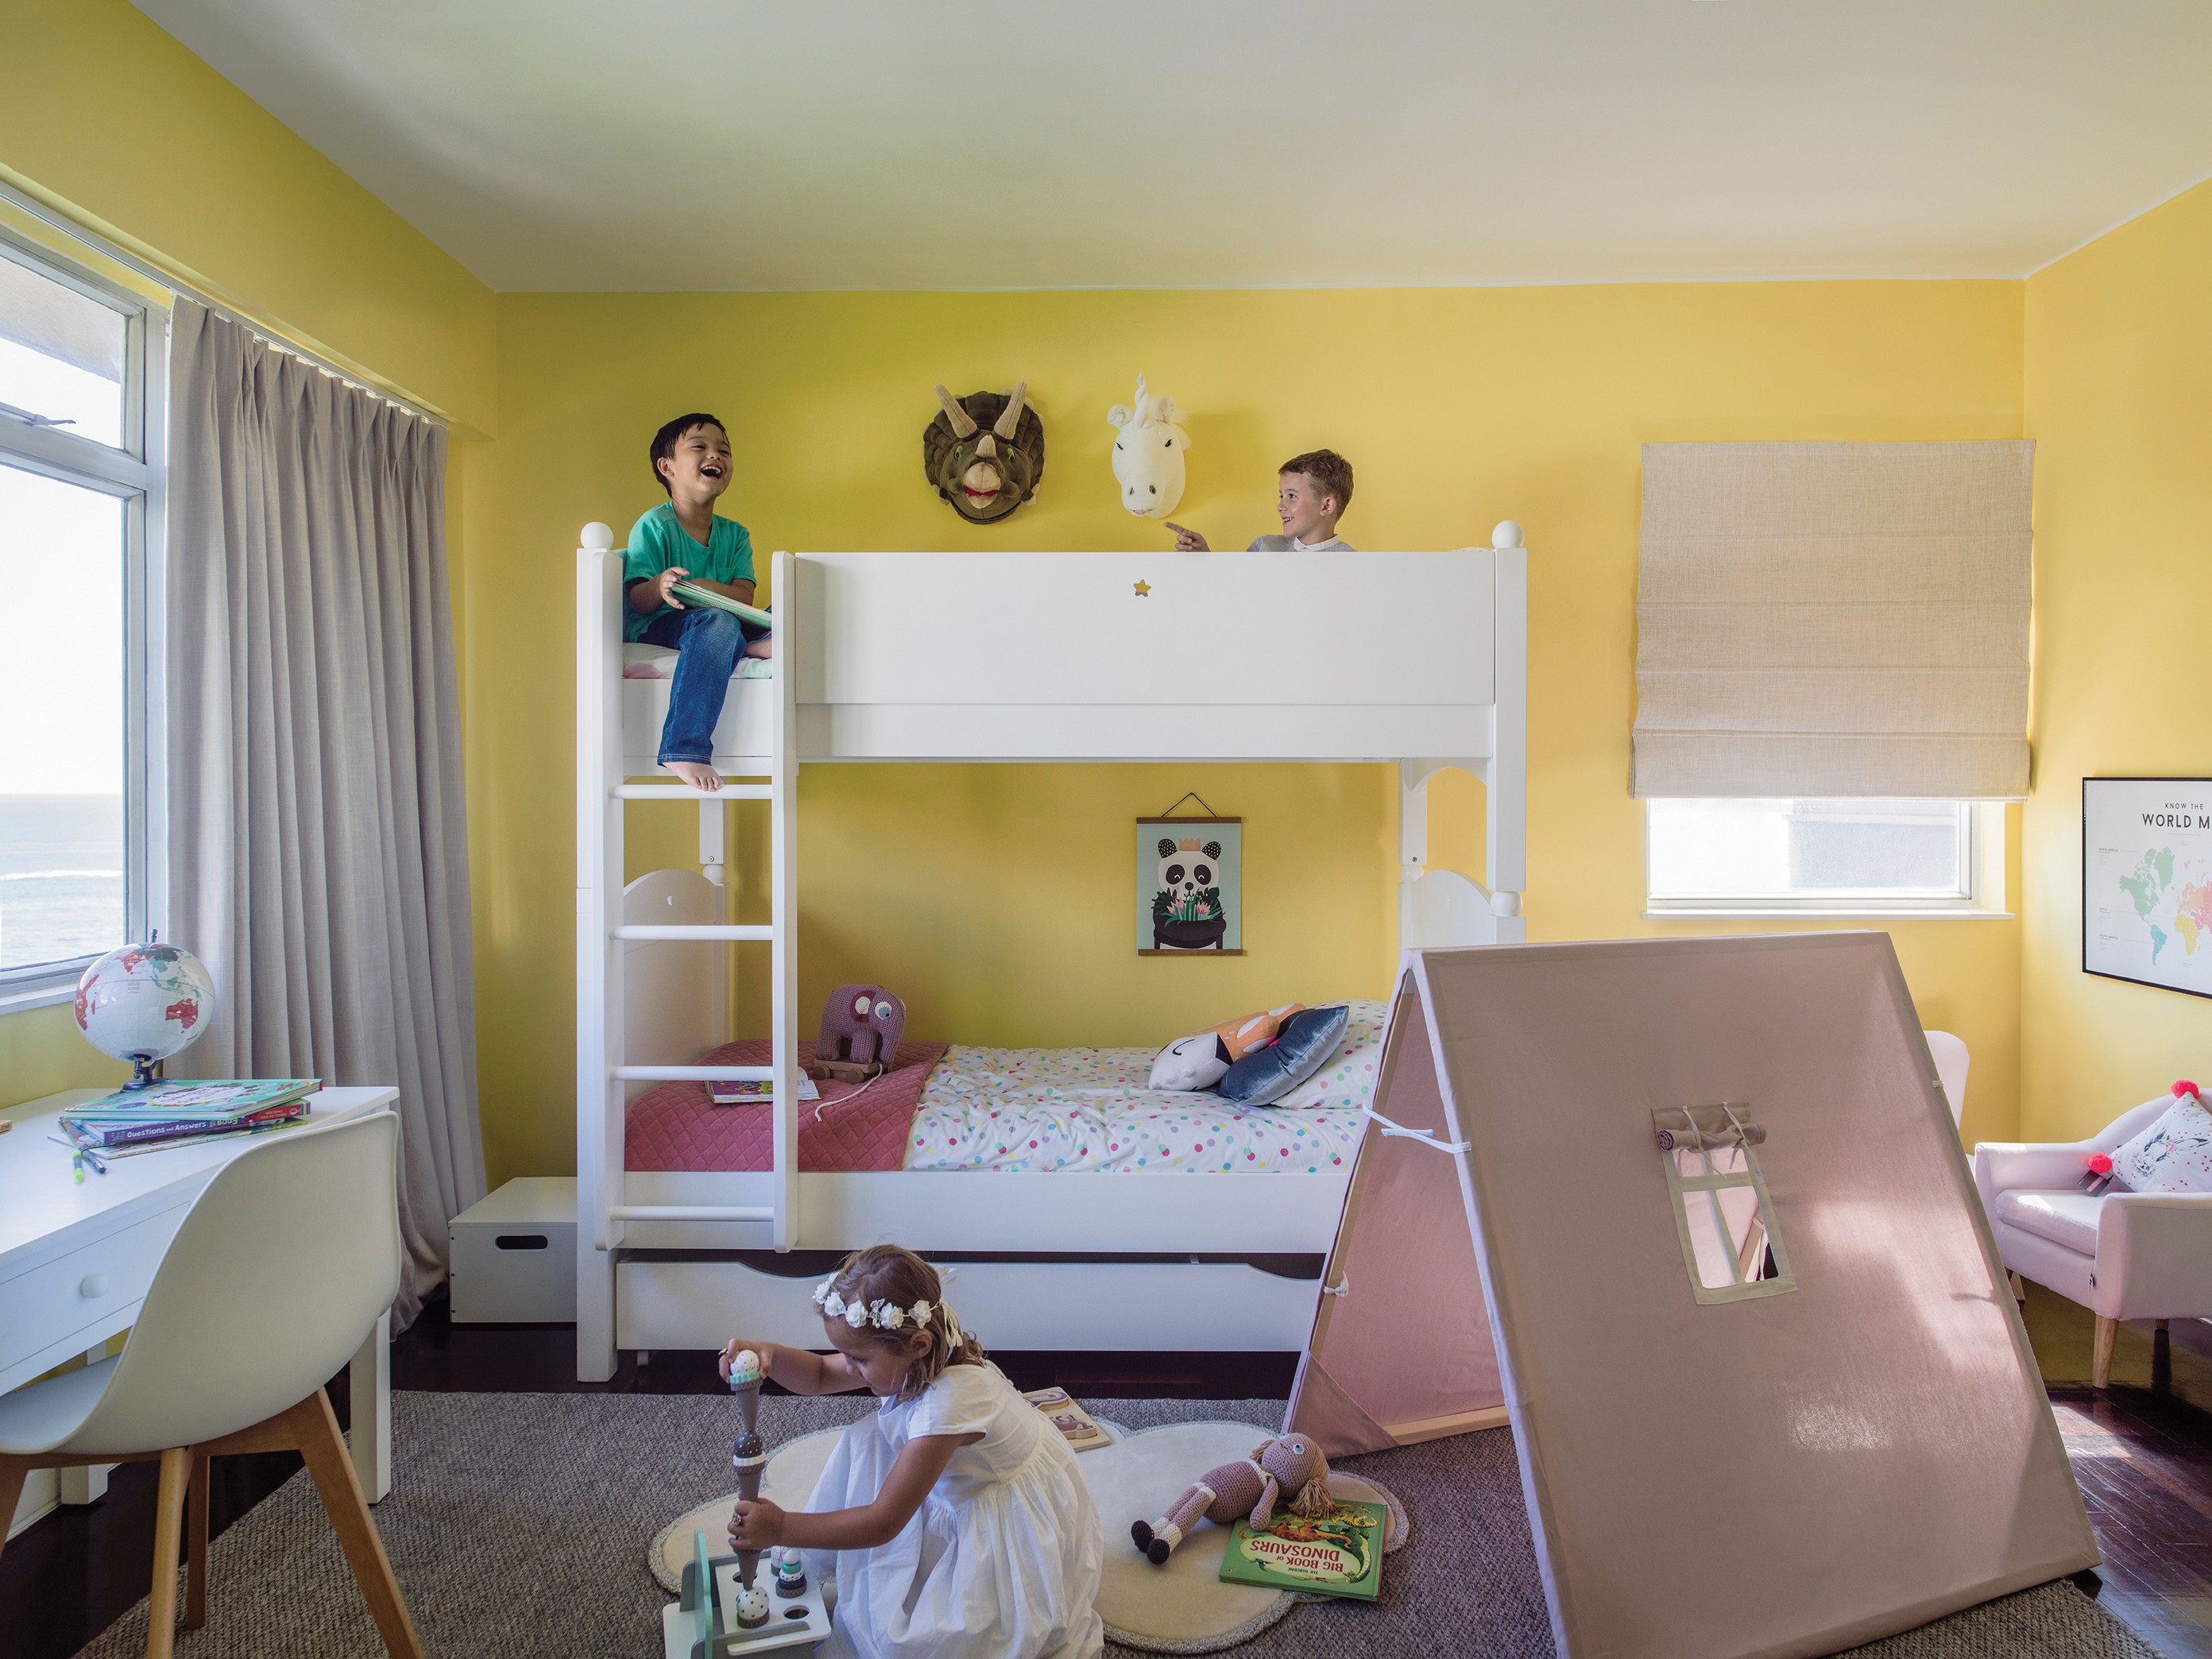 Children’s furniture from Indigo Living ensures safety and maximises the use of space.